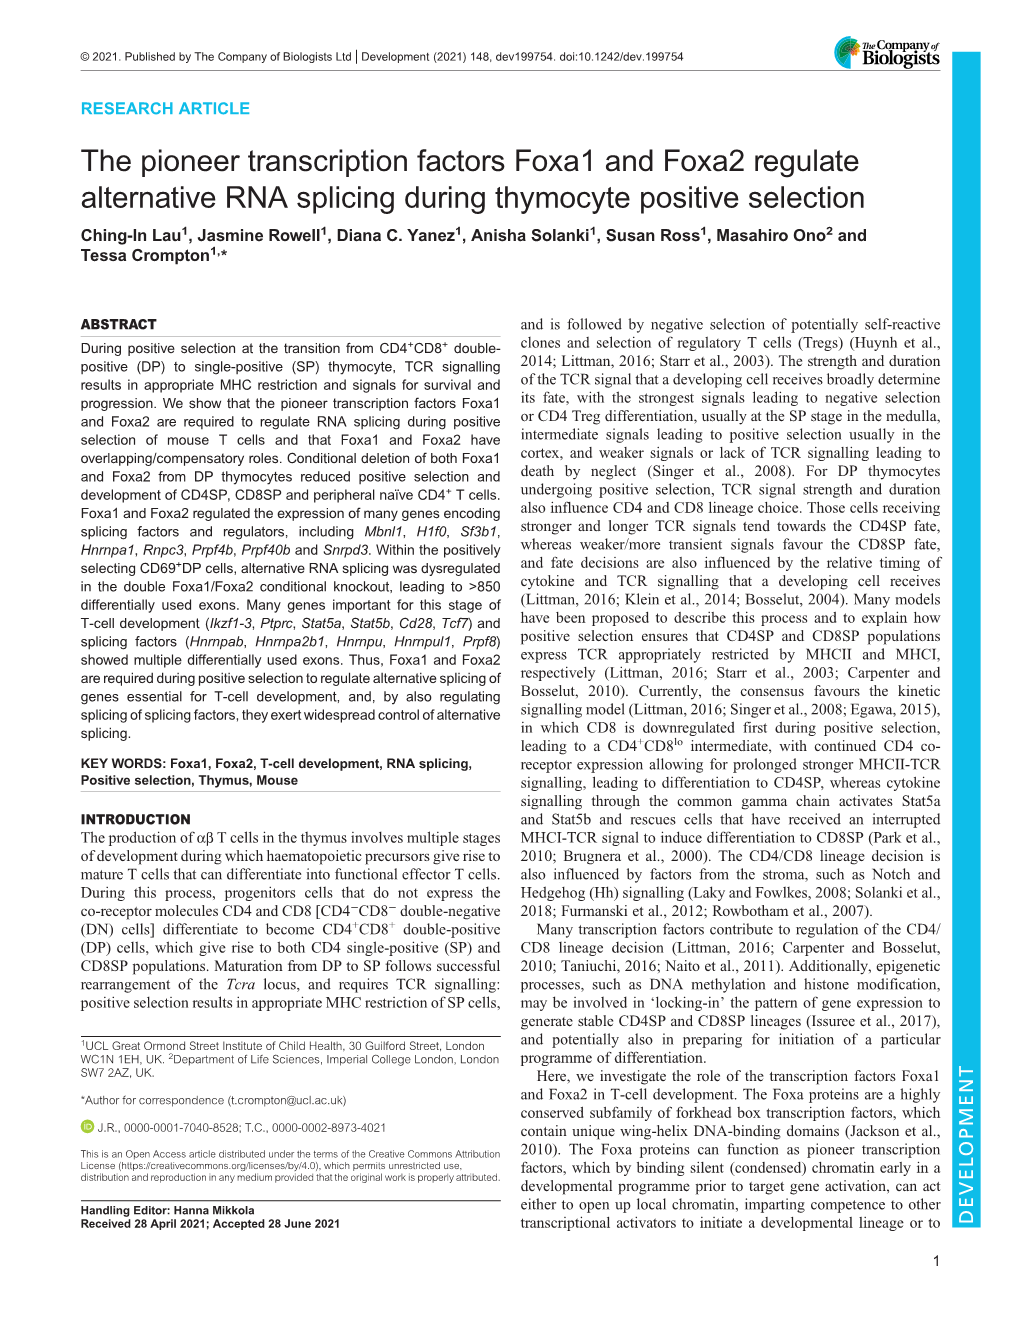 The Pioneer Transcription Factors Foxa1 and Foxa2 Regulate Alternative RNA Splicing During Thymocyte Positive Selection Ching-In Lau1, Jasmine Rowell1, Diana C